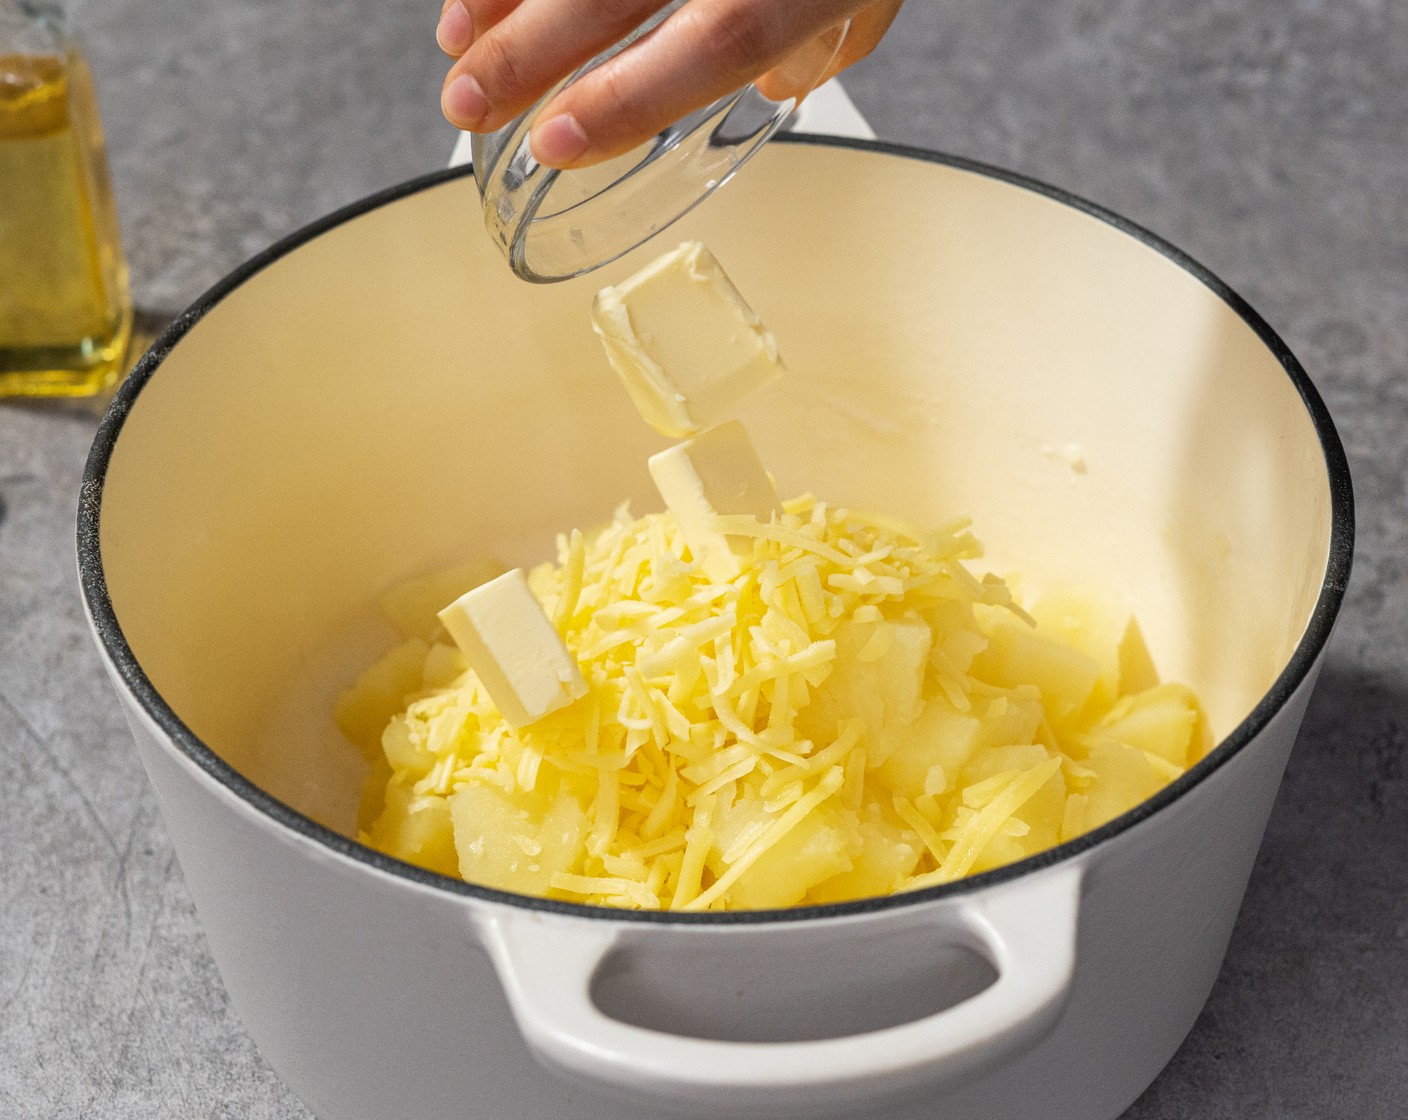 step 8 When the potatoes are cooked, drain and return them back to the warm pot. Add Cheddar Cheese (2/3 cup) and Butter (2 Tbsp), then use a masher to mash everything together.